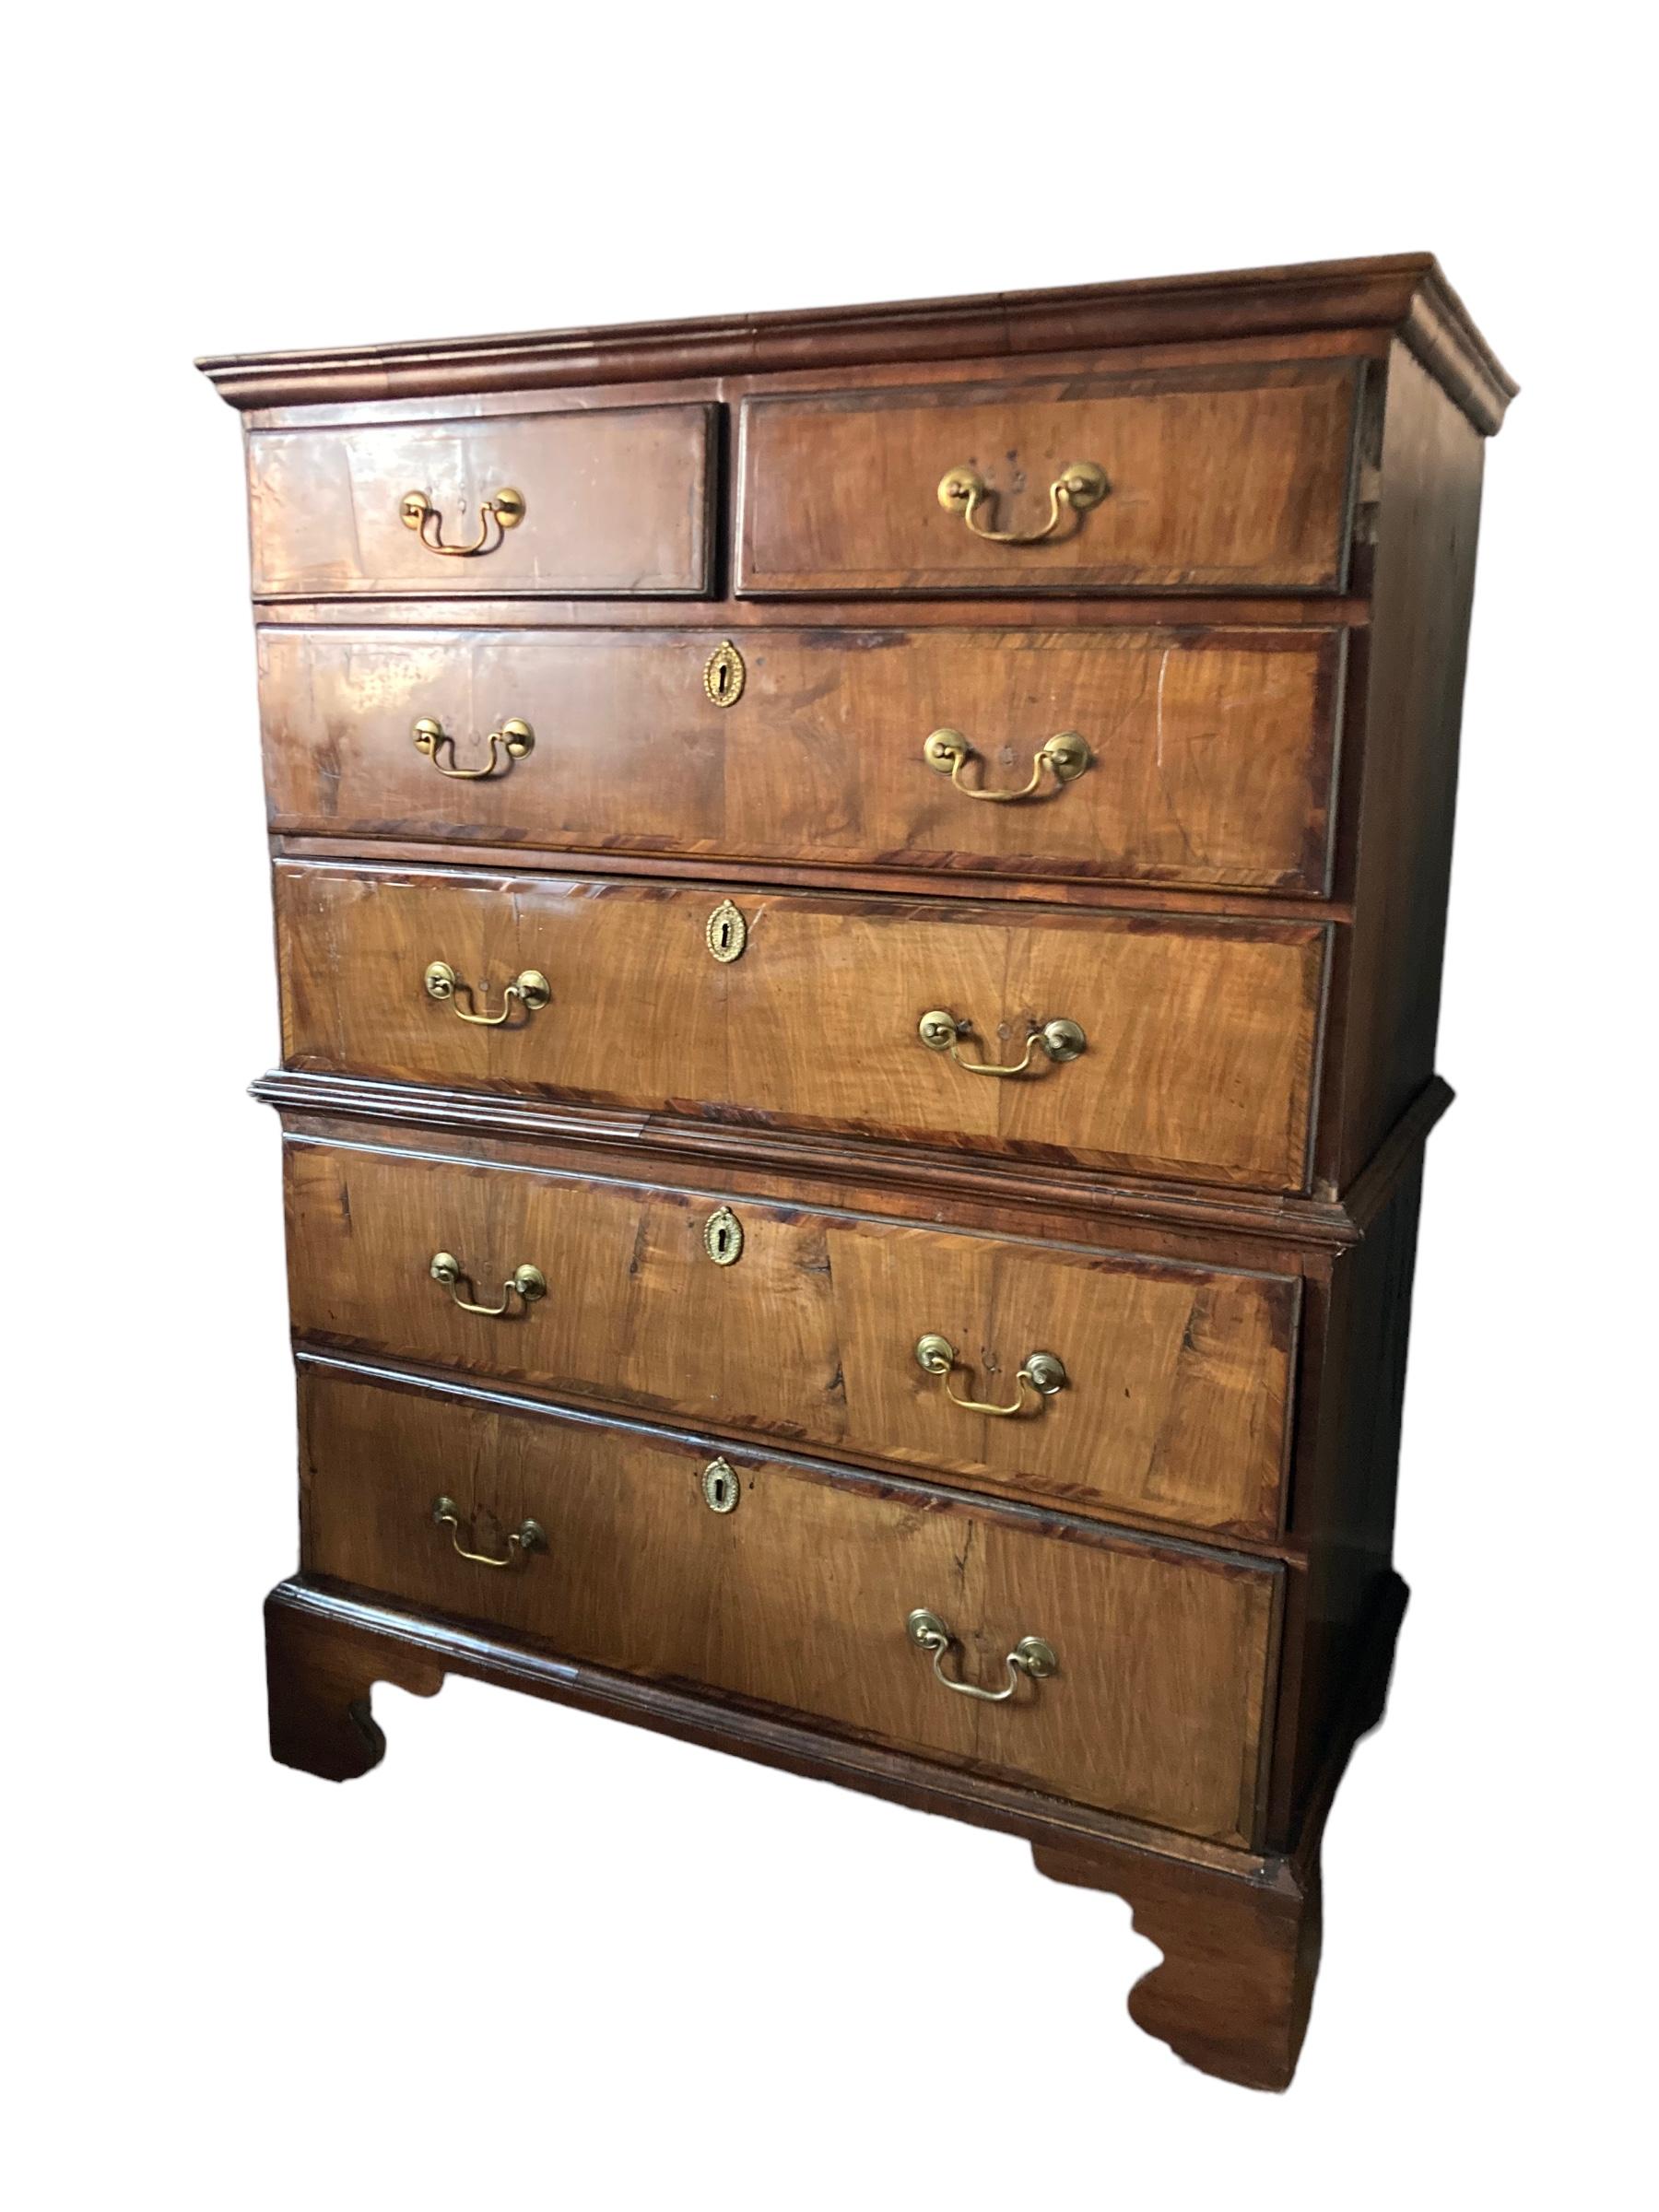 Antique Late 18th Century George III Walnut Chest on Chest. Four over Two Graduated Large drawers. Brass handle and key holes. Very good condition. This wonderful piece, over 200 years old has imposing character with the practicality of a large item